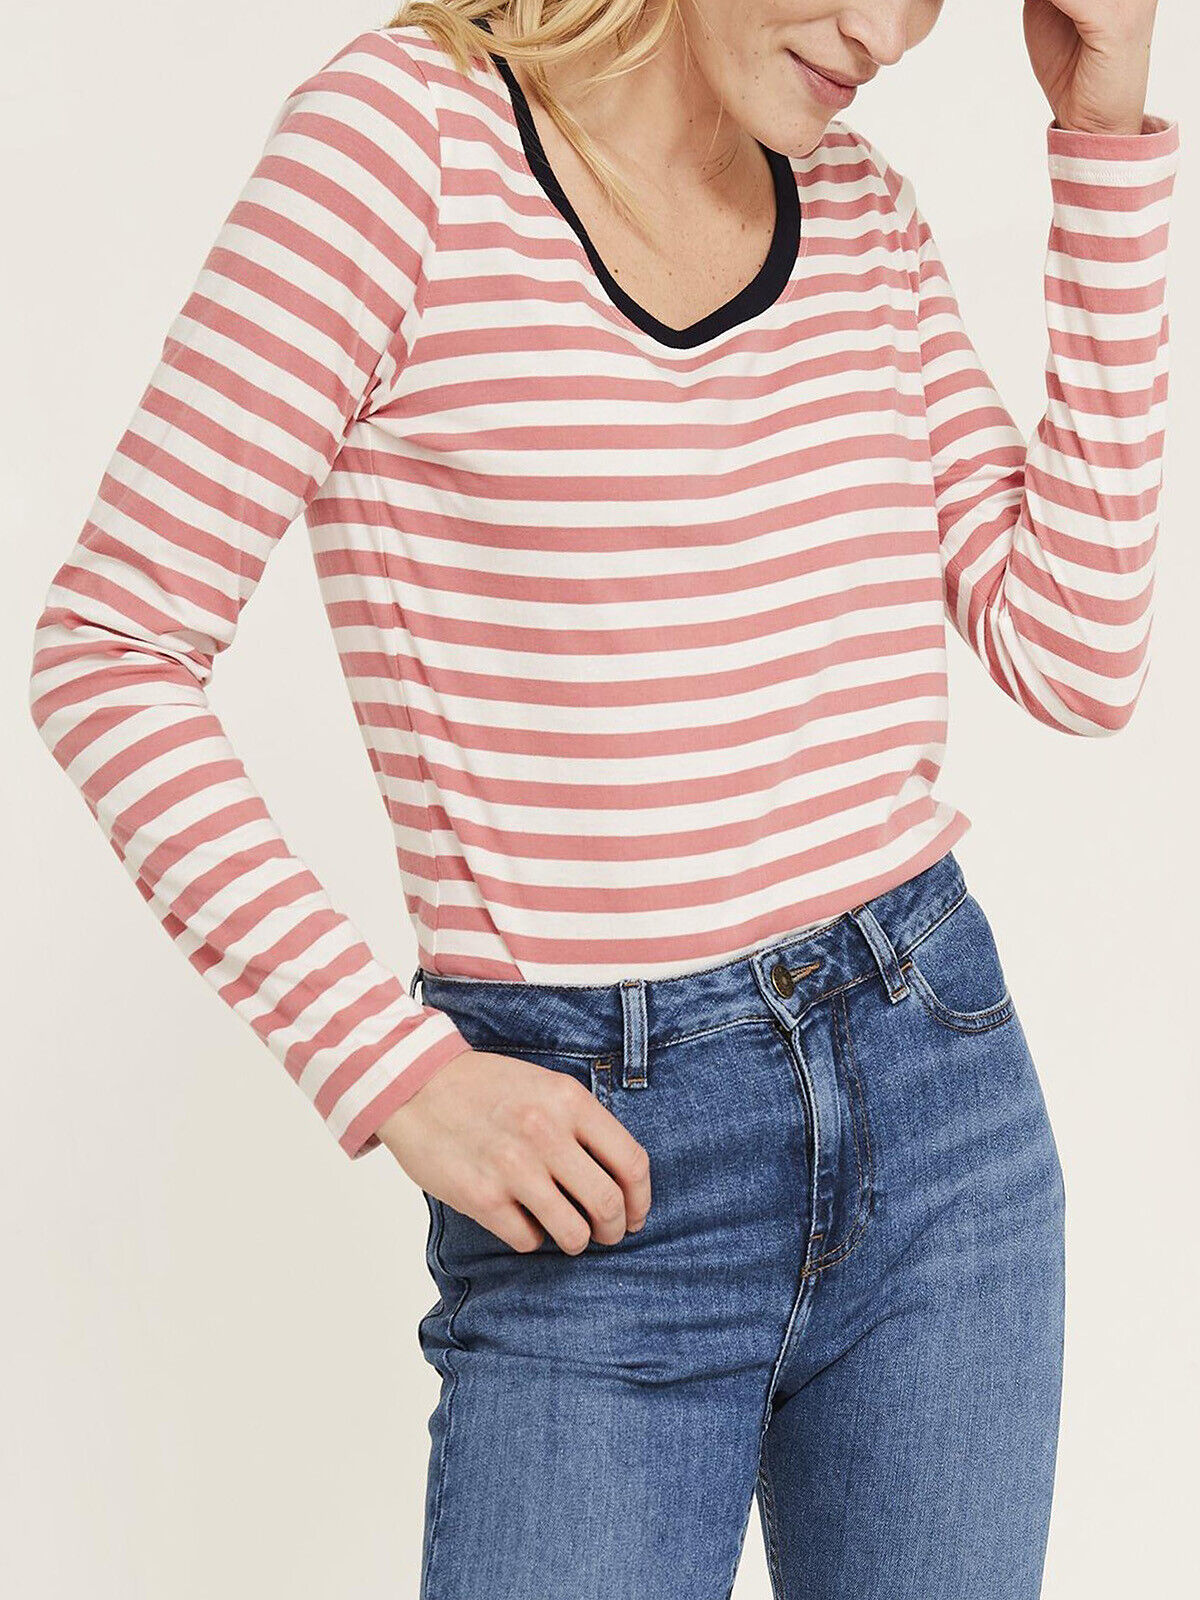 EX Fat Face Rosewood Cora Stripe Top in Size 12 RRP £22